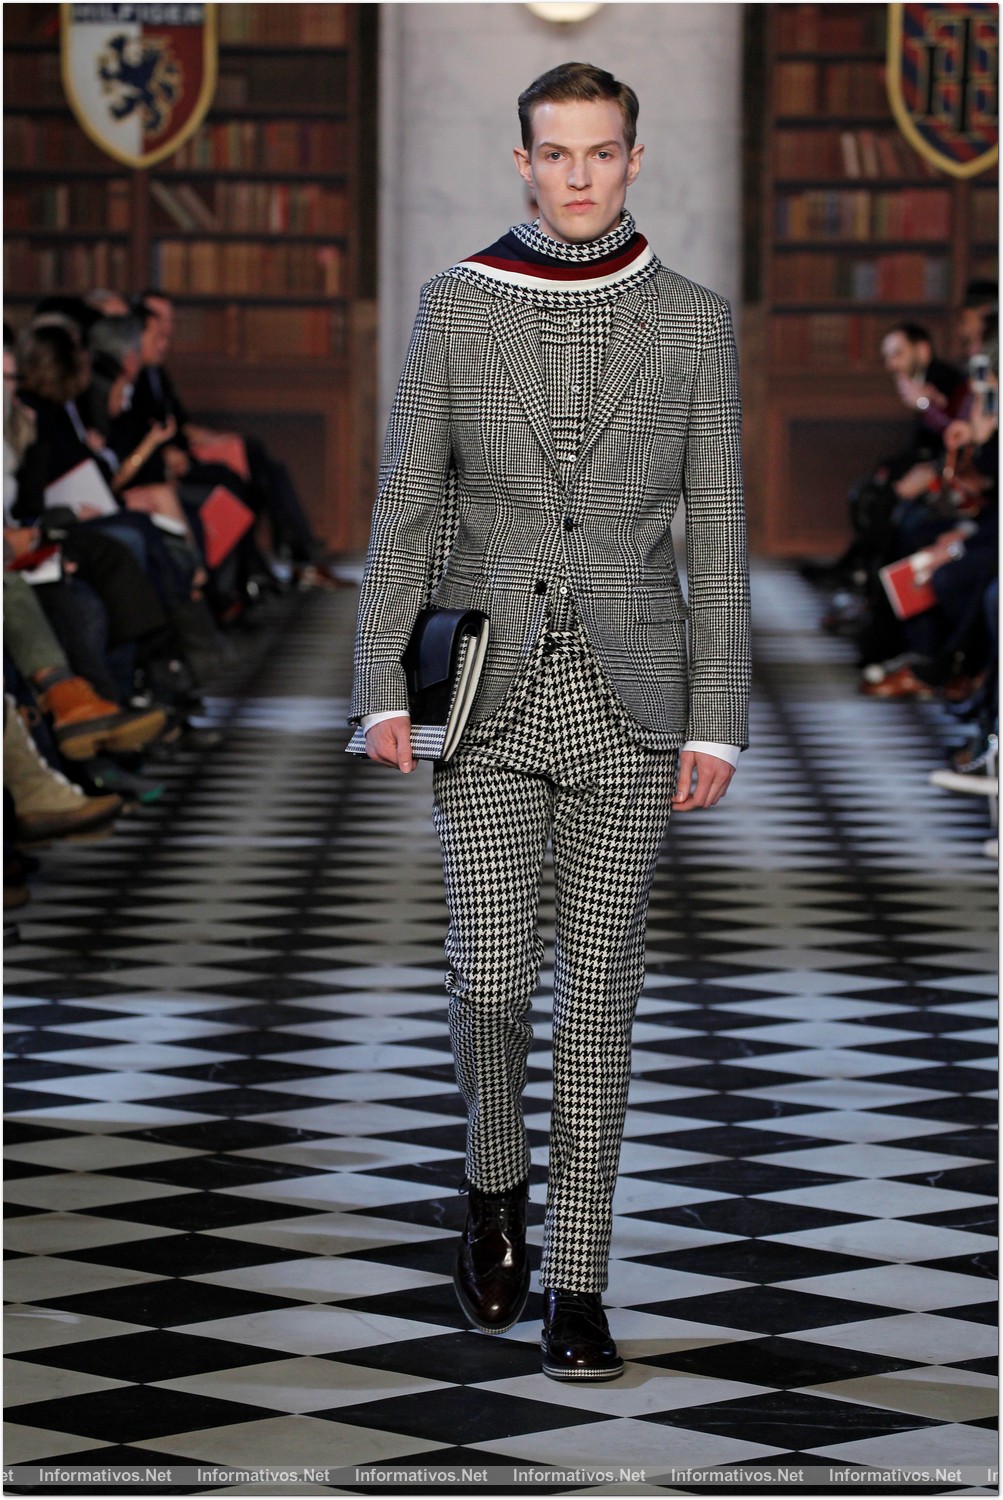 NY08FEB013.- Desfile Tommy Hilfiger Fall 2013 Men's Collection. 18. ADRIAN